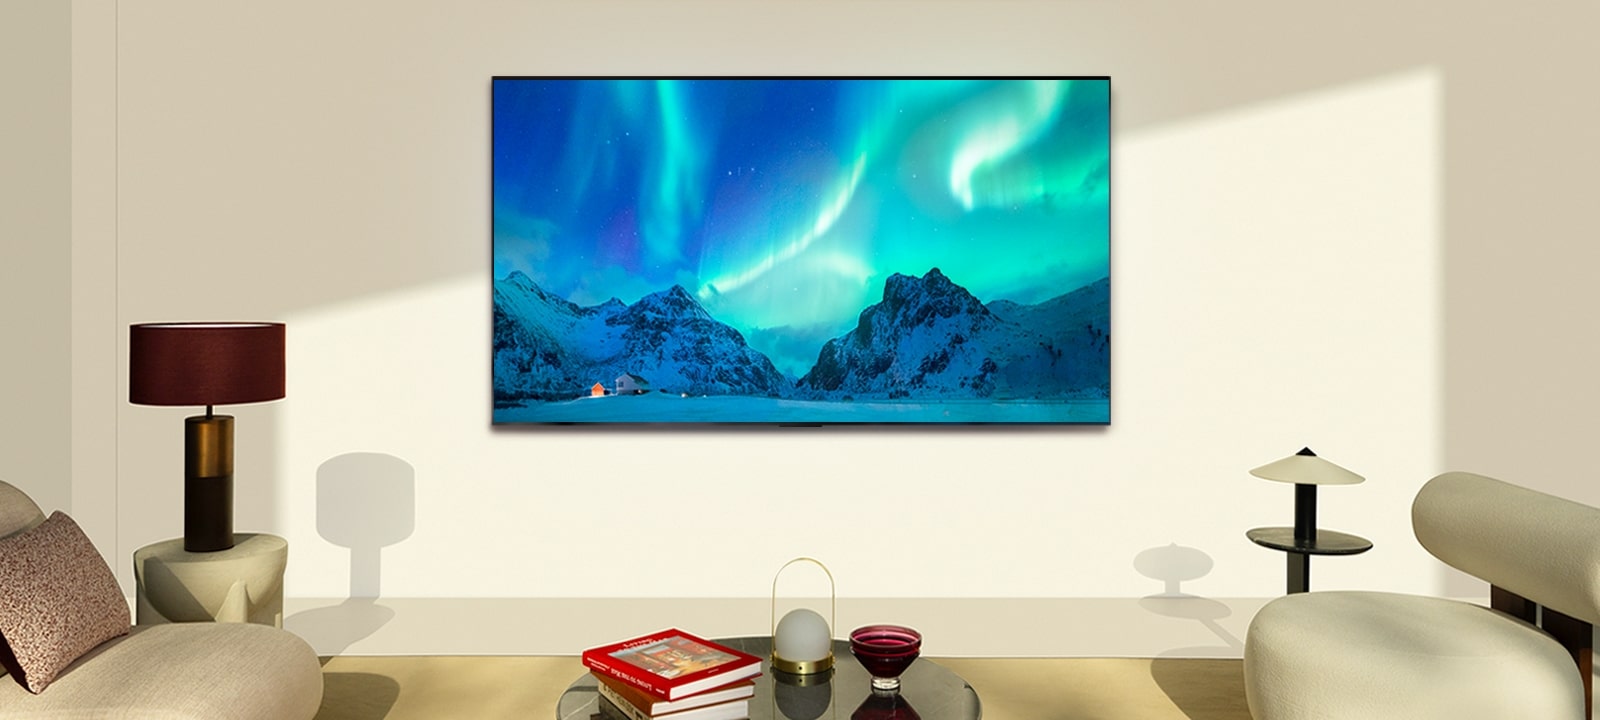 LG OLED TV in a modern living space in daytime. The screen image of the aurora borealis is displayed with the ideal brightness levels.